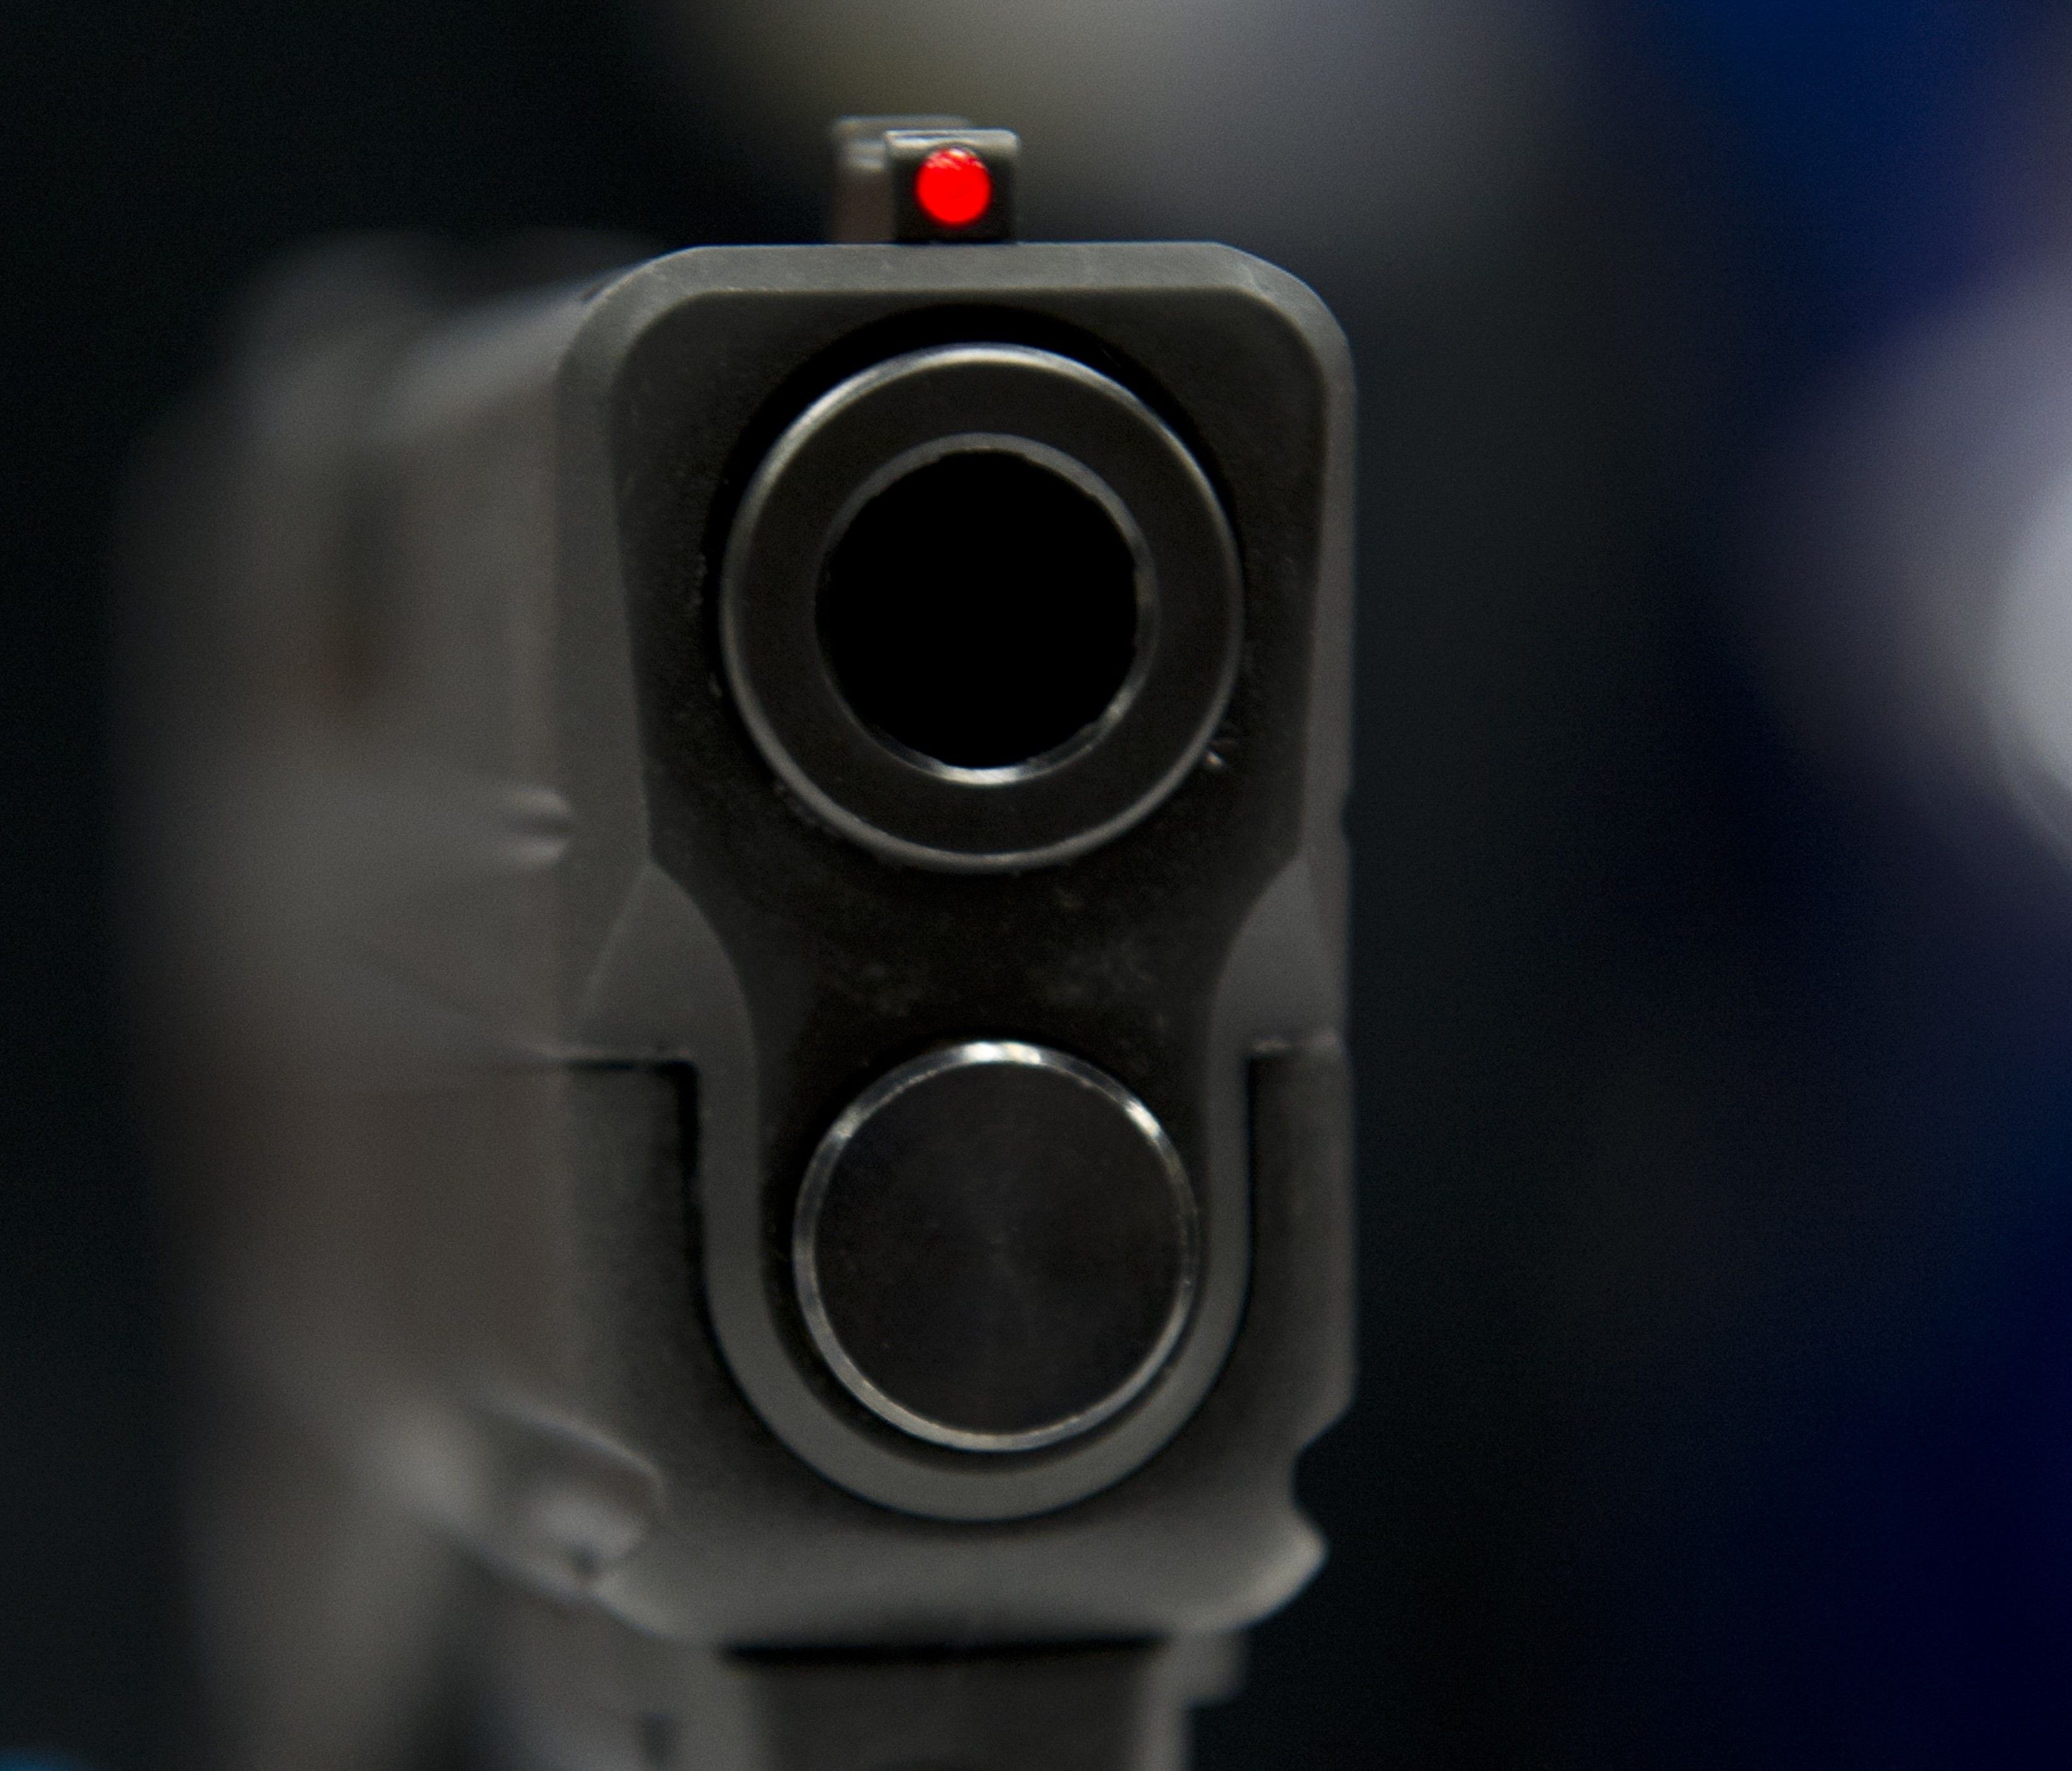 This file photo taken on April 25, 2014 shows a view down the barrel of a semi-automatic handgun.